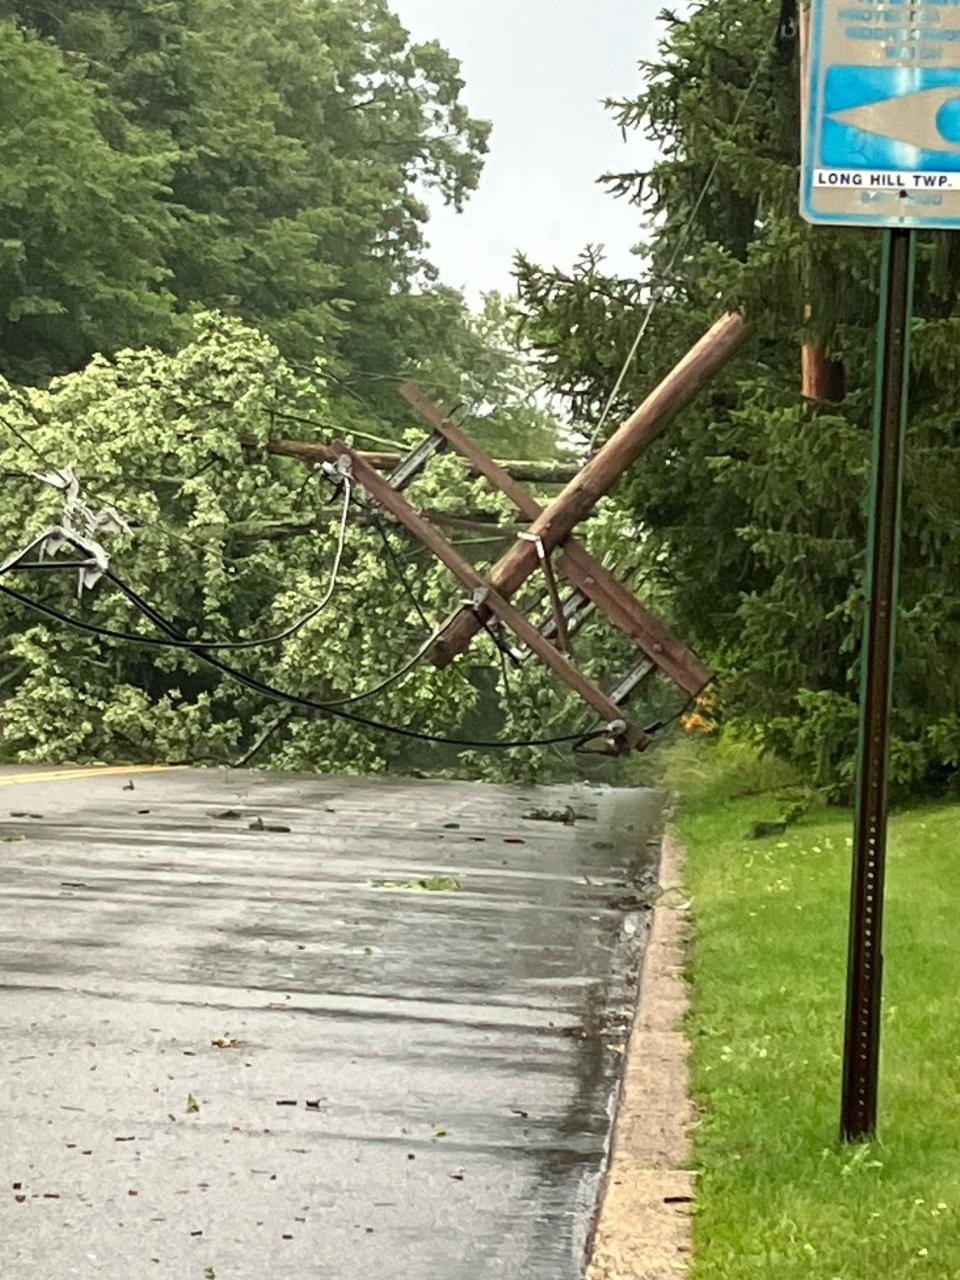 Storm damage in Long Hill, in a photo captured by a utility crew, after intense rains and thunderstorms rolled through the area